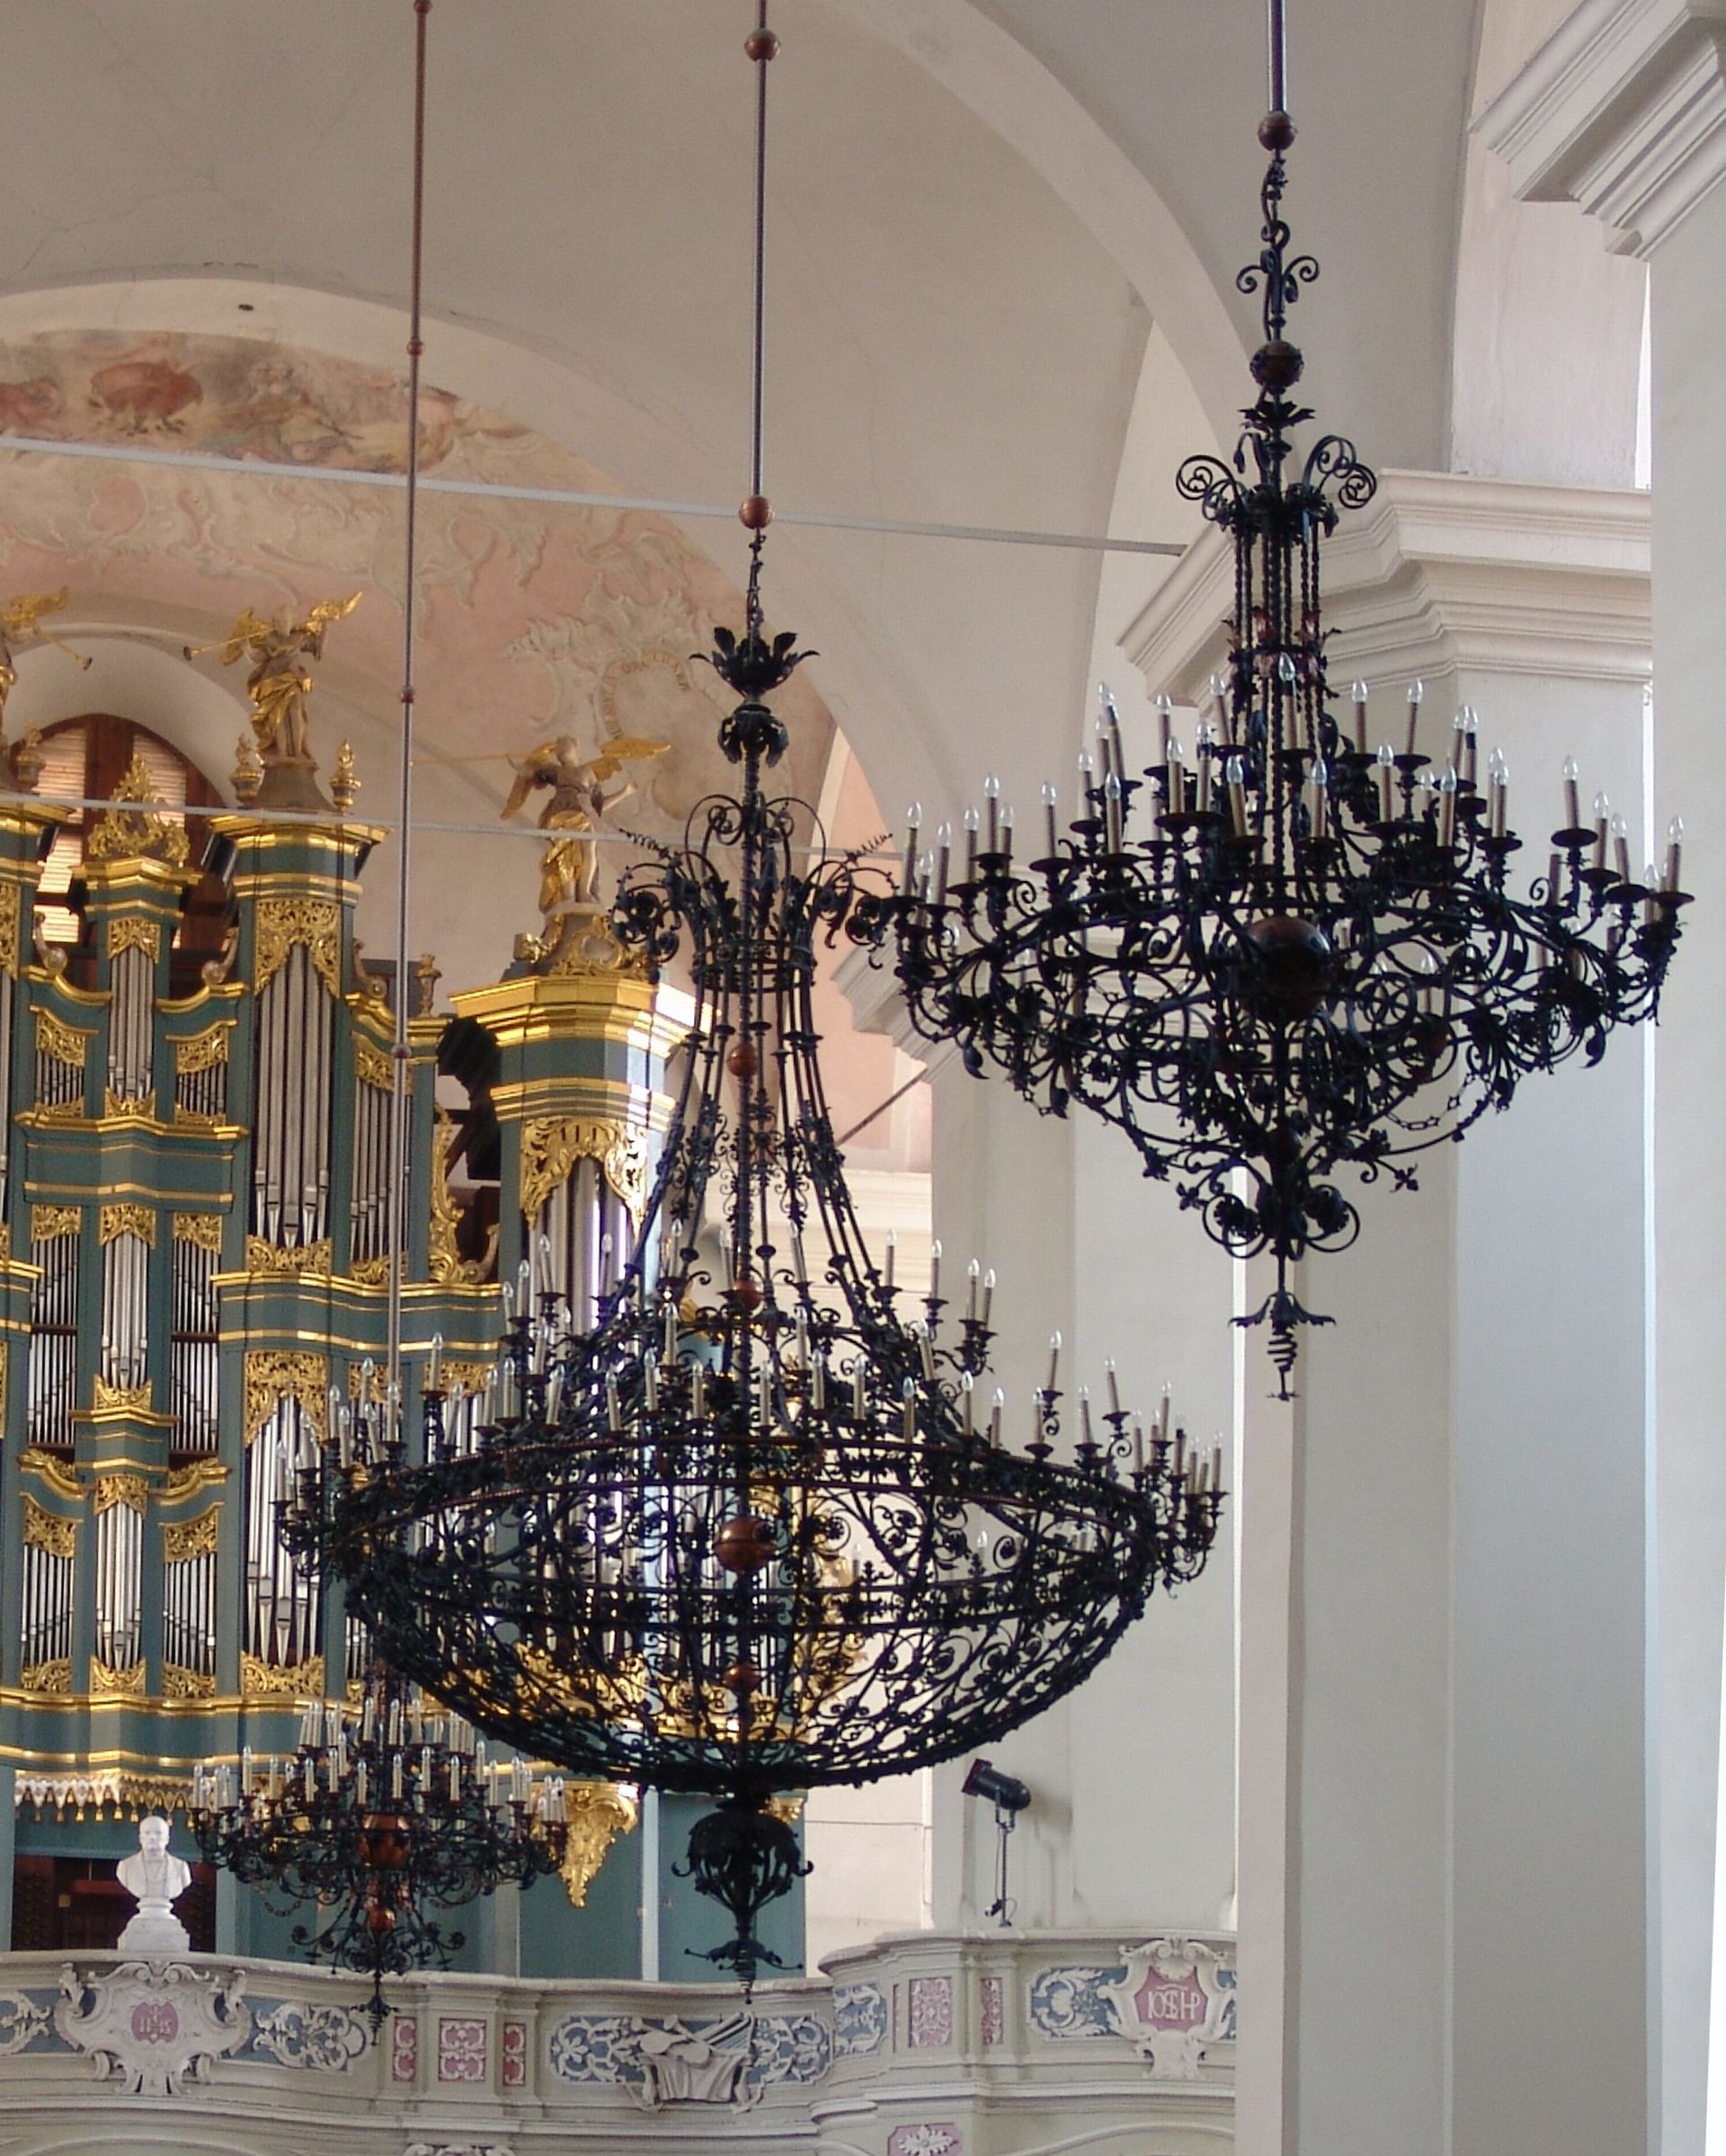 Chandeliers at the Church of John the Baptist and St. John the Apostle and Evangelist in Vilnius. Photo by Aloyzas Petrašiūnas, 2017